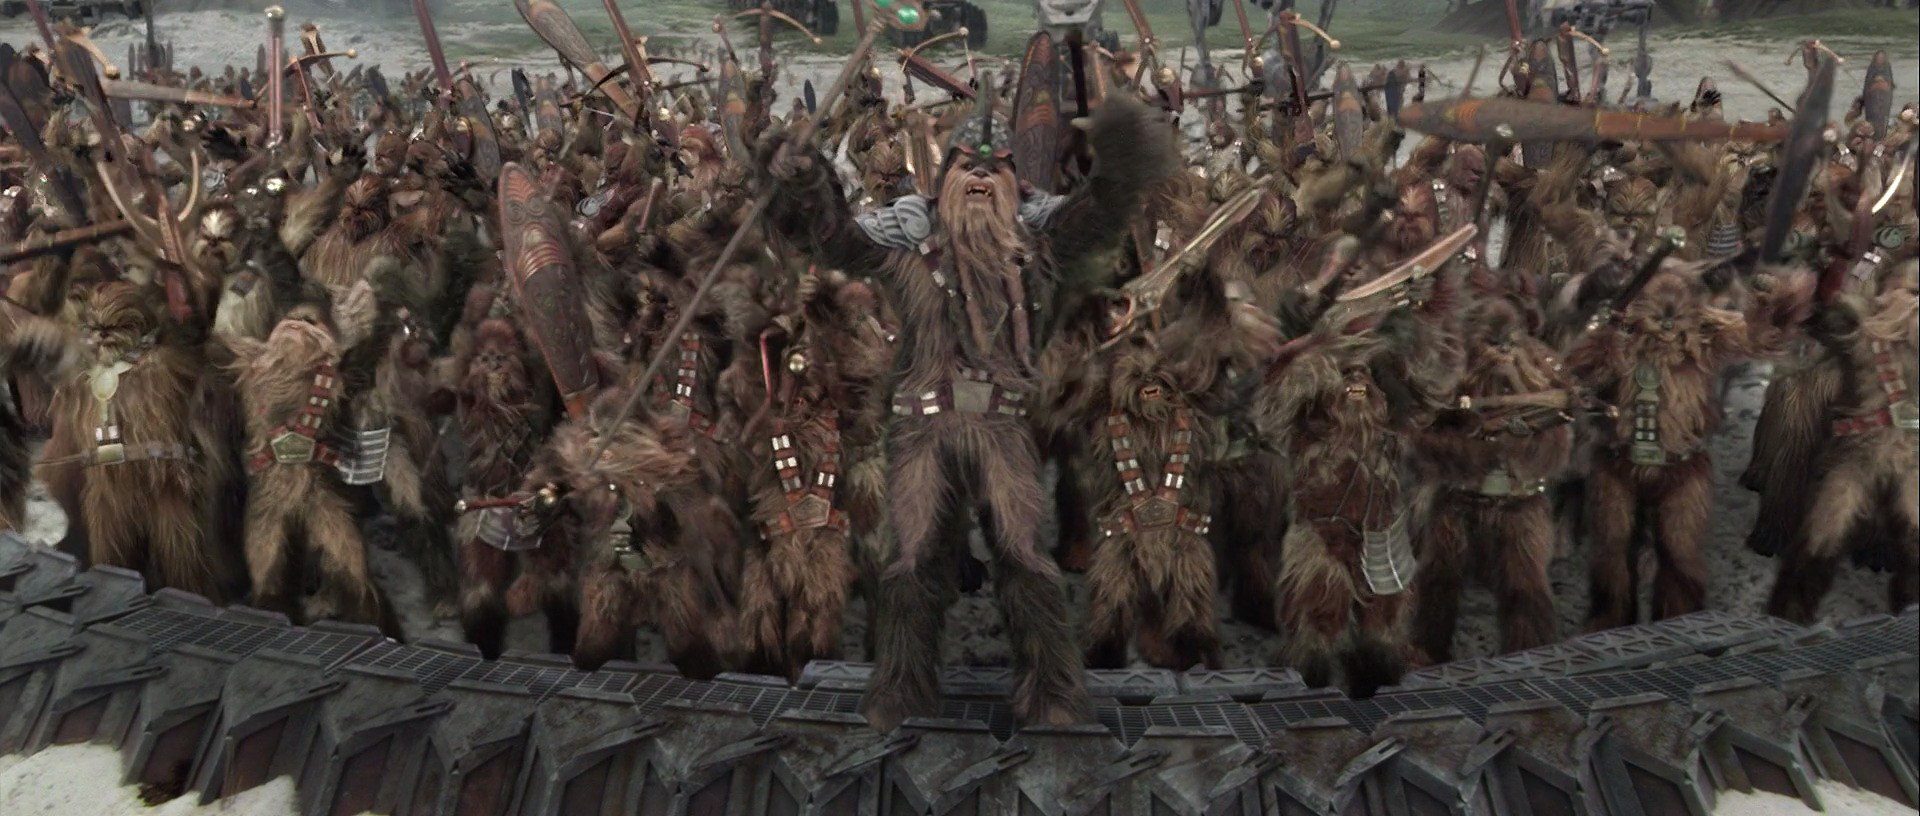 wookiee army